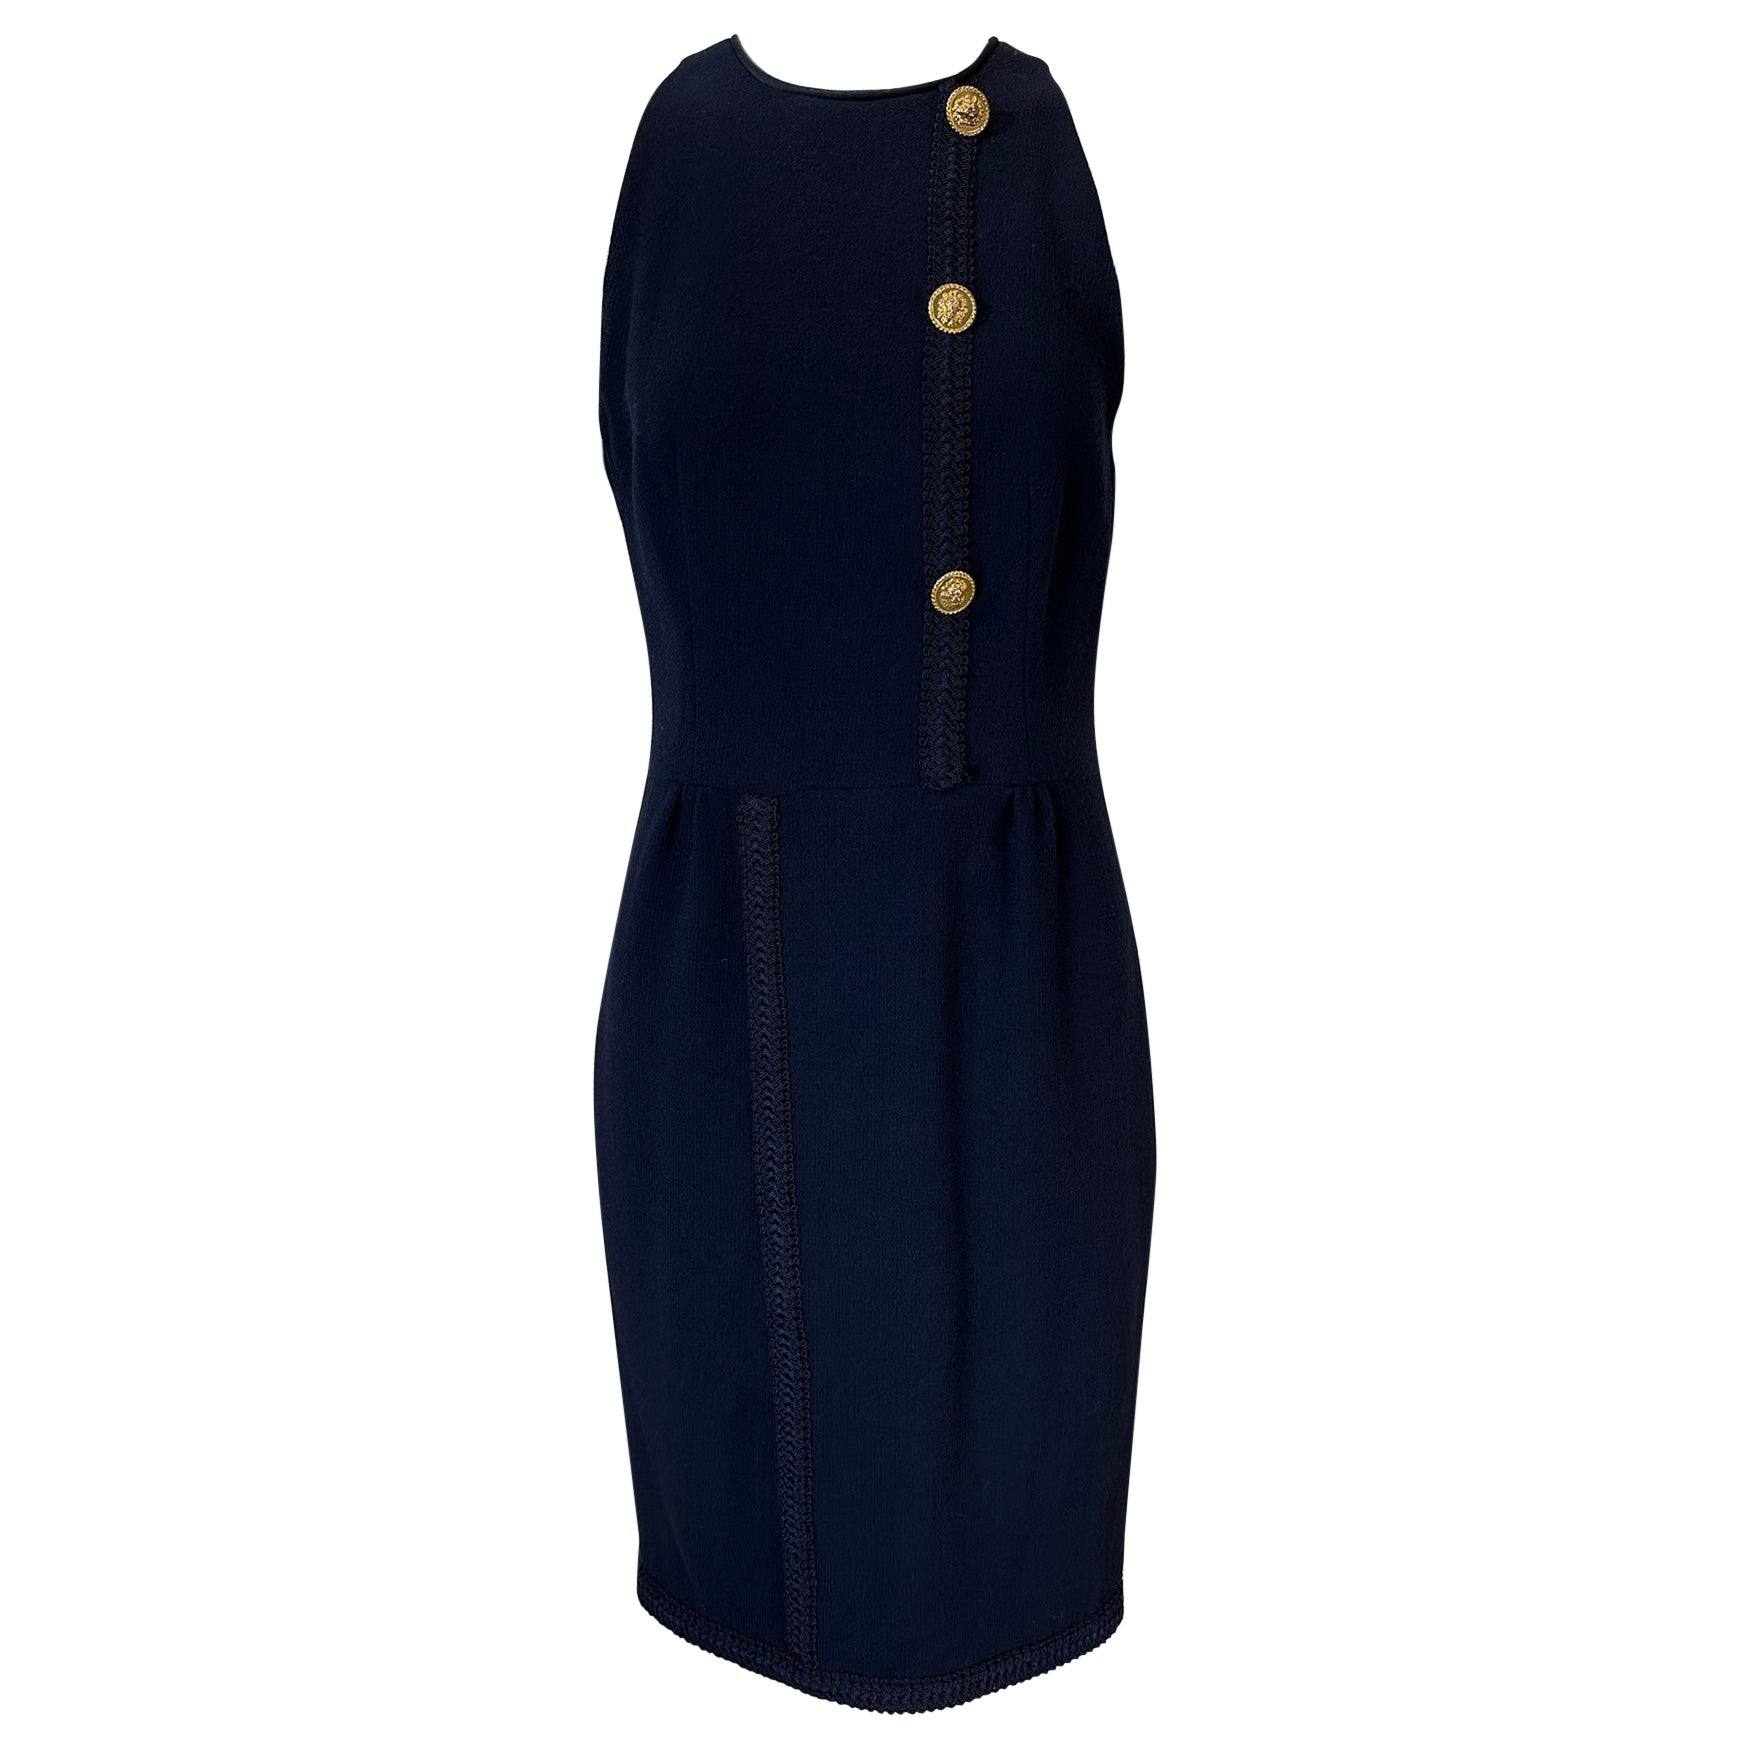 Irene Galitzine Couture Navy Blue Racer Neck Fitted Sheath Braid Trim Dress 1960 For Sale